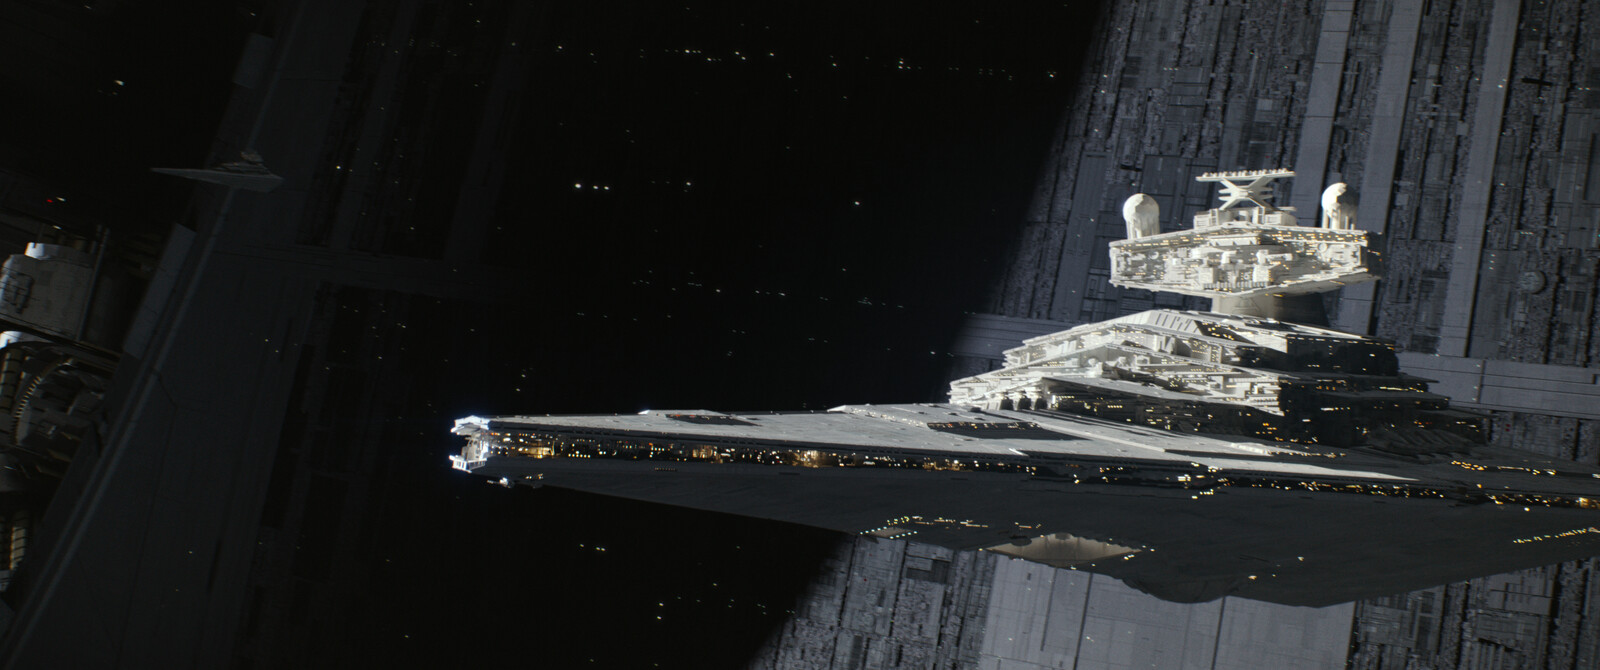 The classic Star destroyer